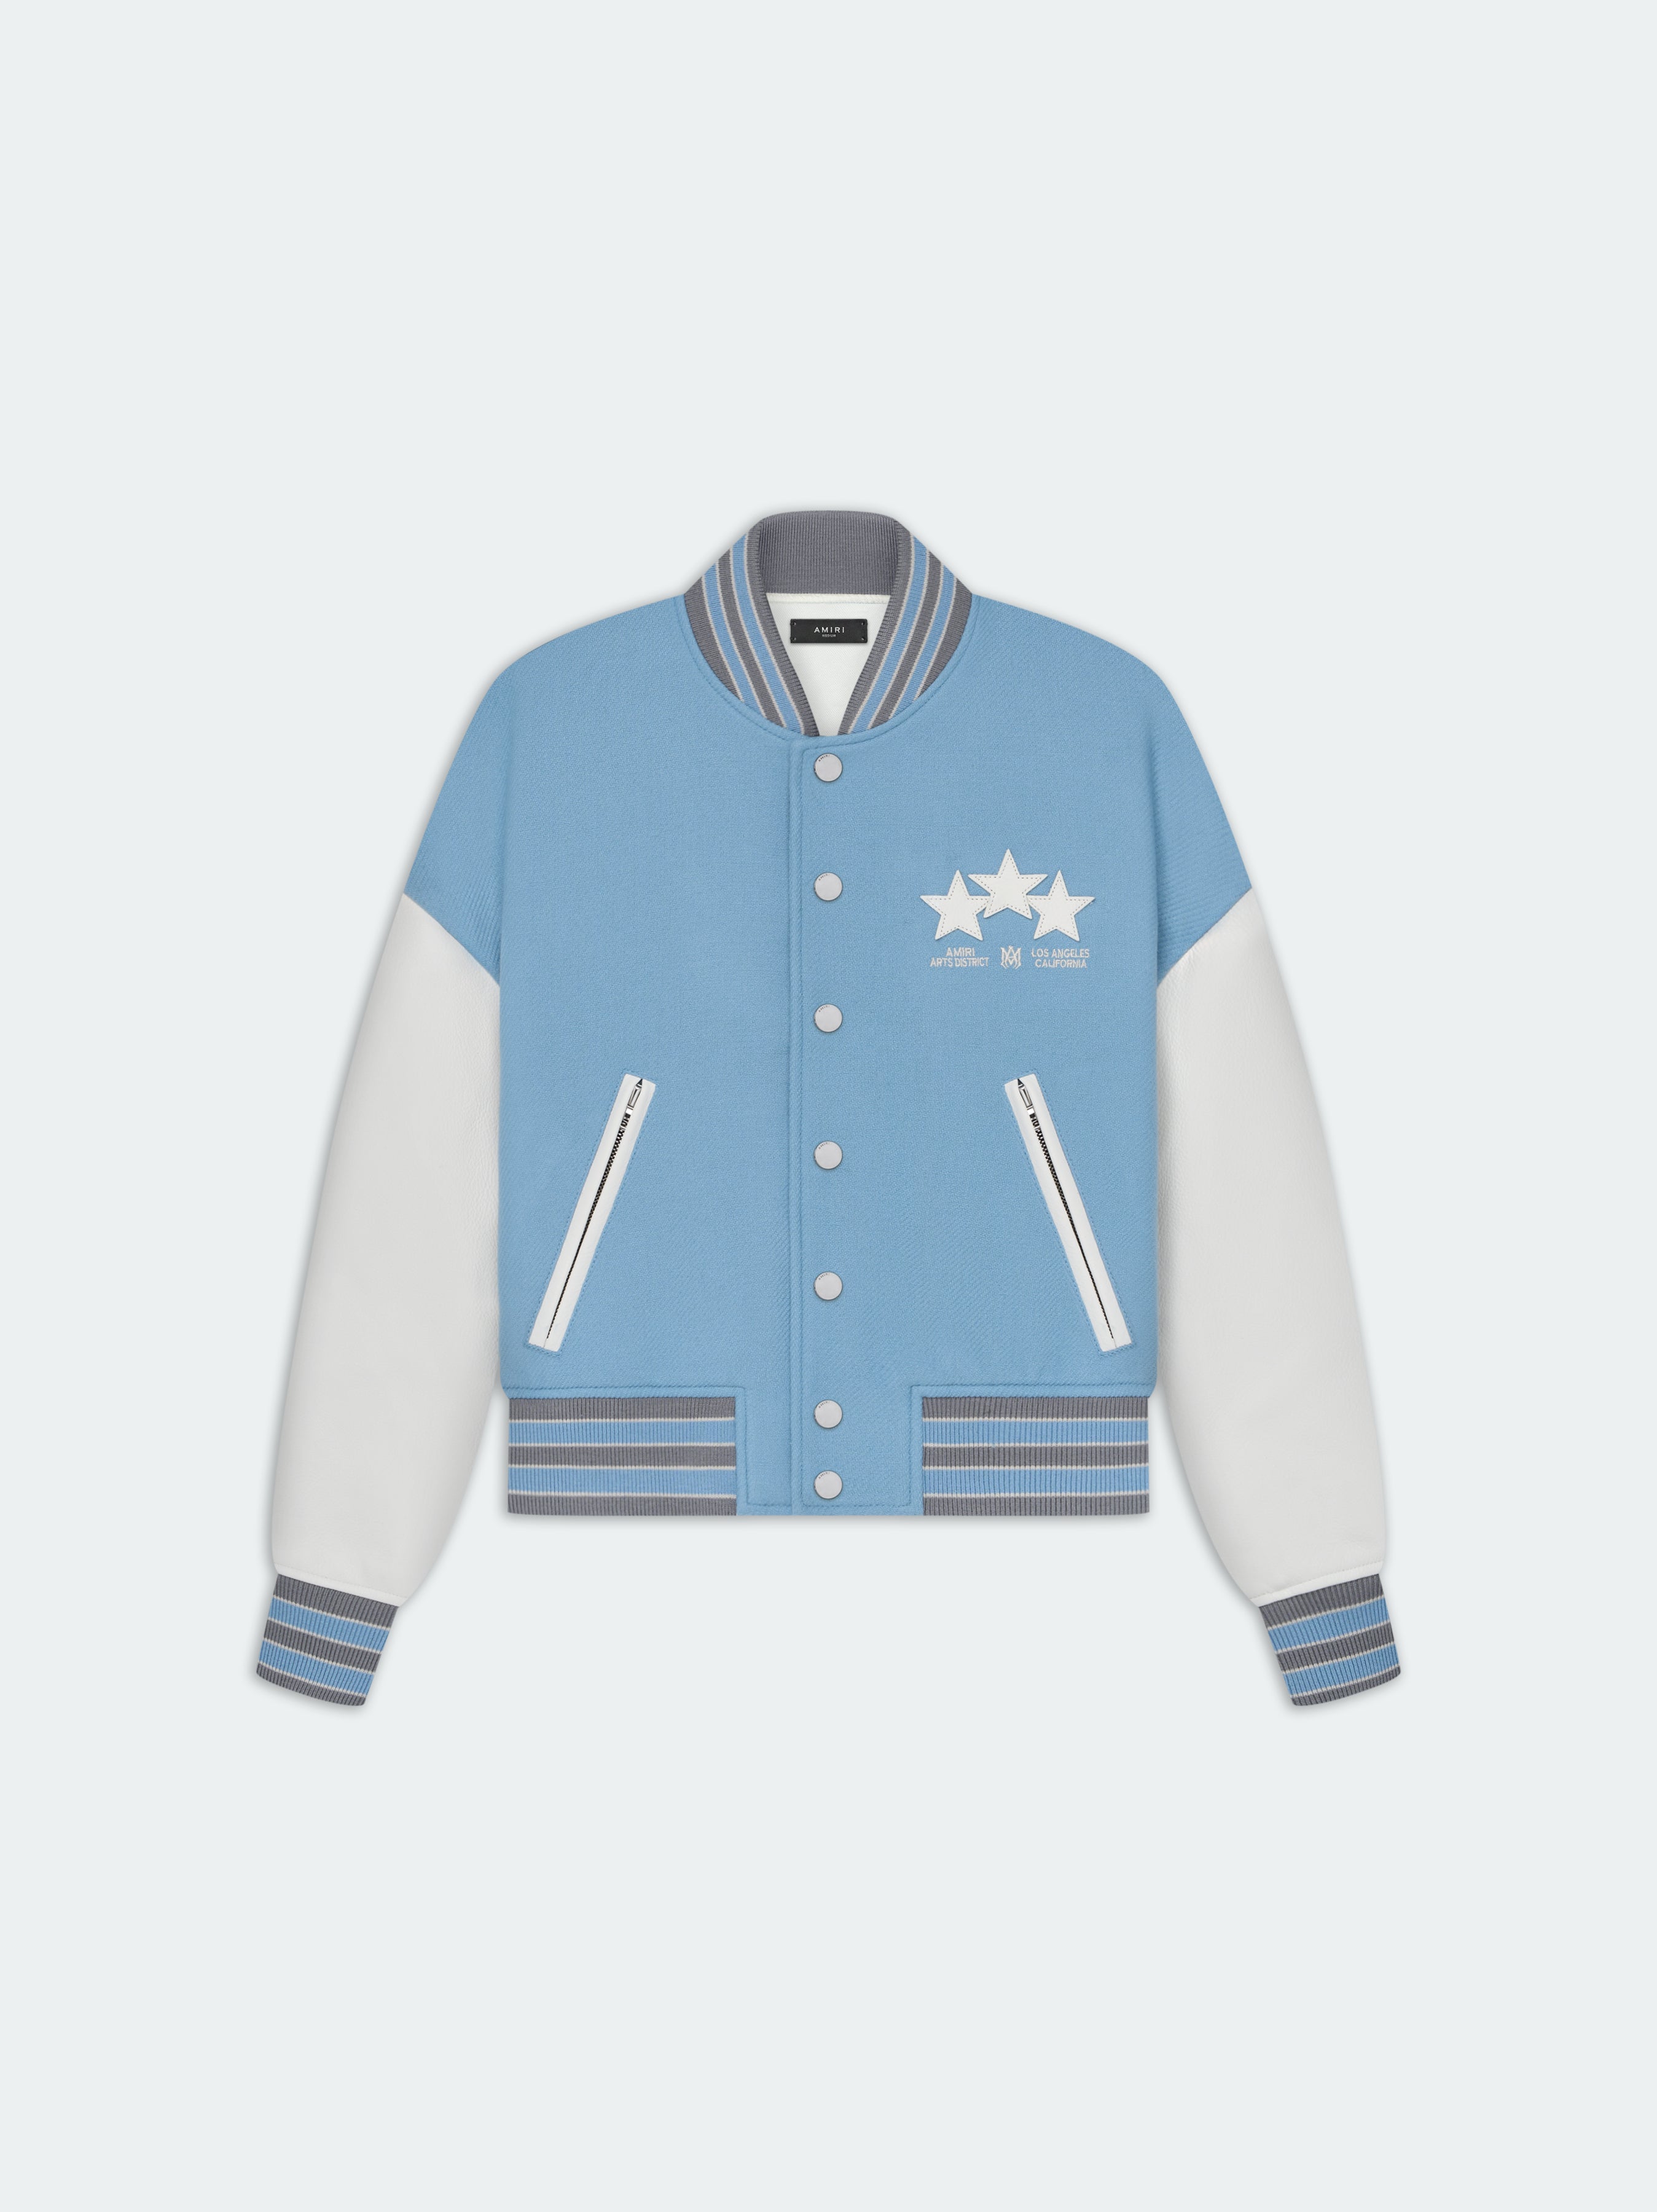 Product WOMEN - STARS VARSITY JACKET - Air Blue featured image